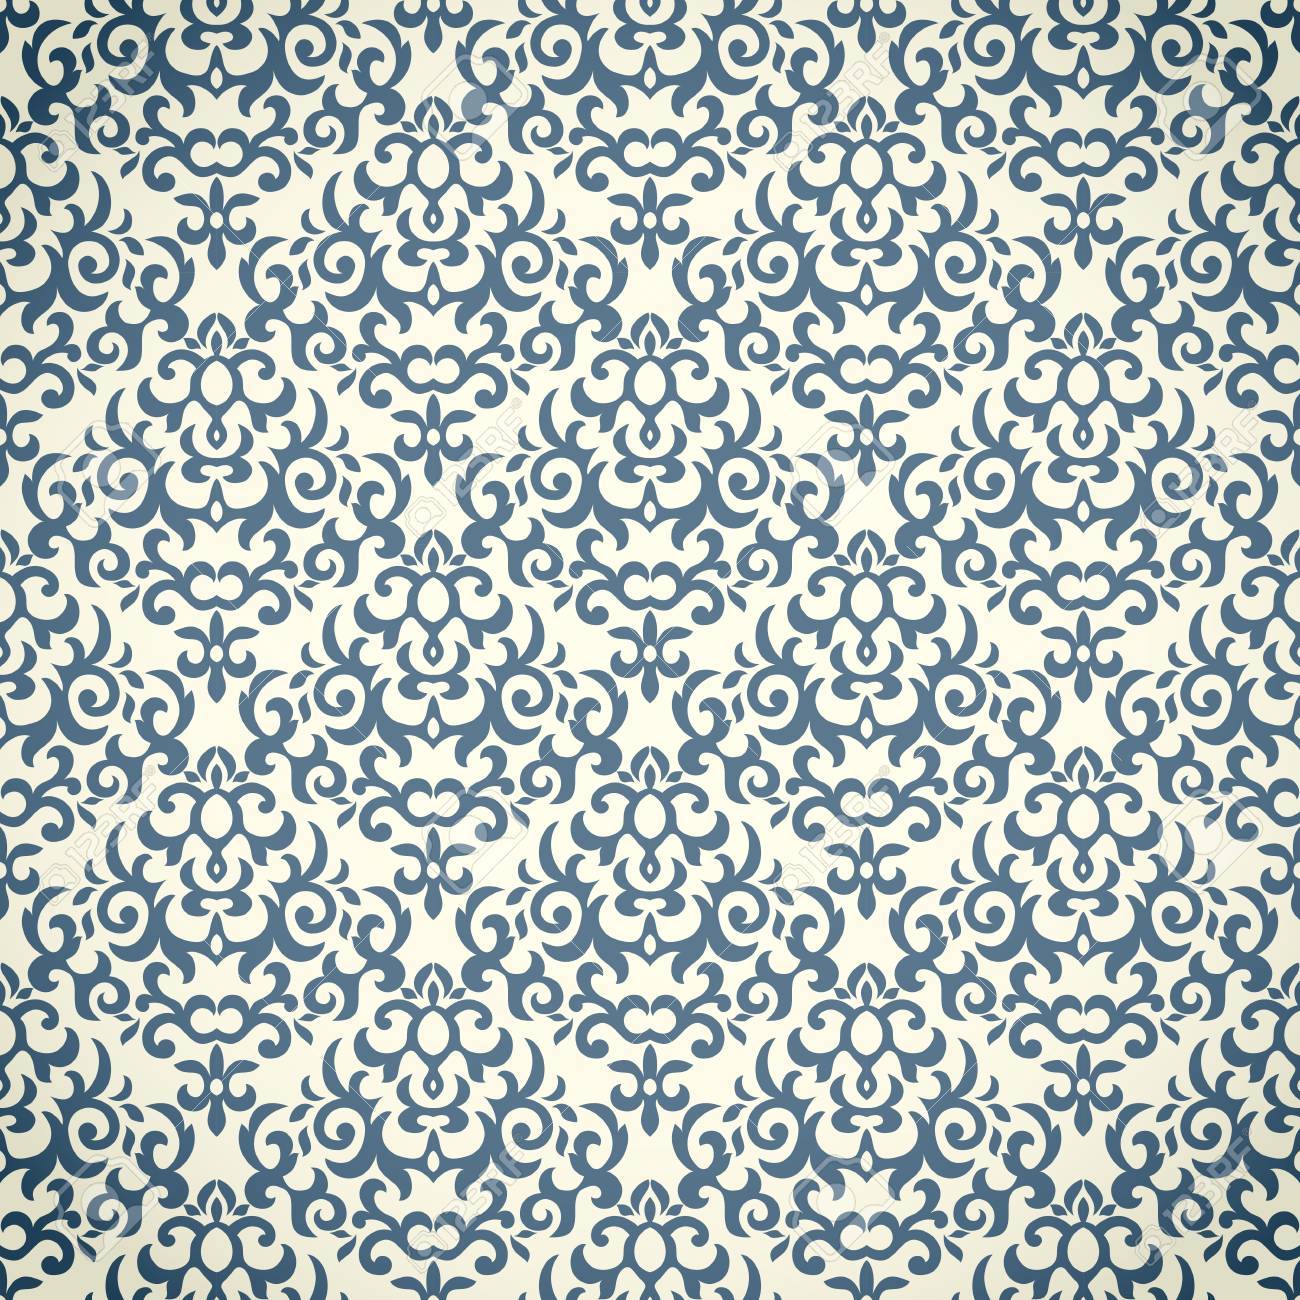 Damask Seamless Pattern Could Be Used As Repeating Wallpaper